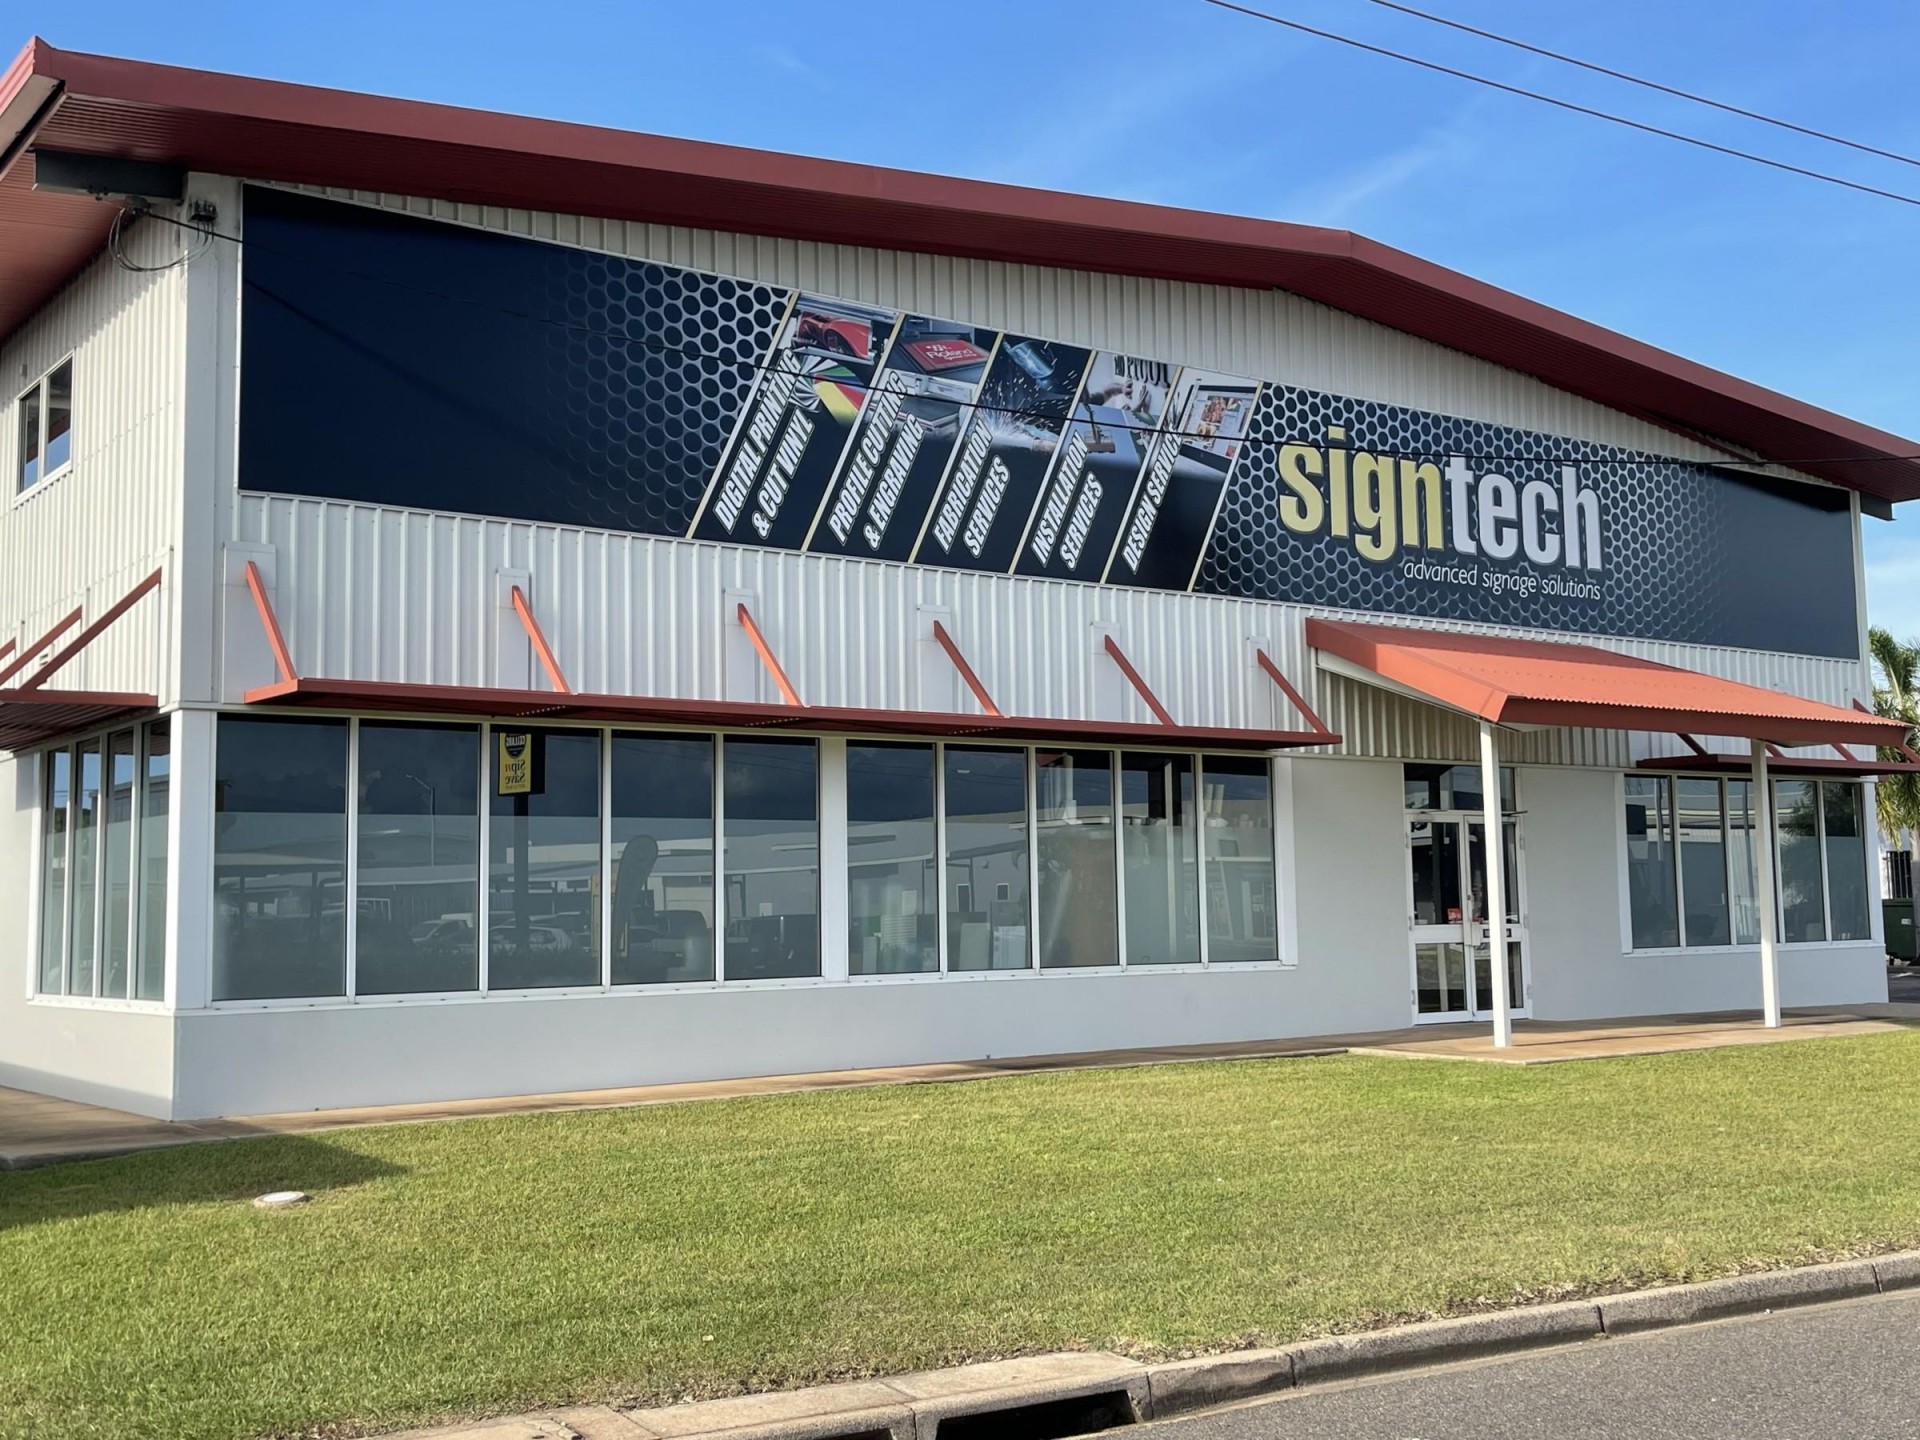 Large Commercial Signage Business - Darwin NT